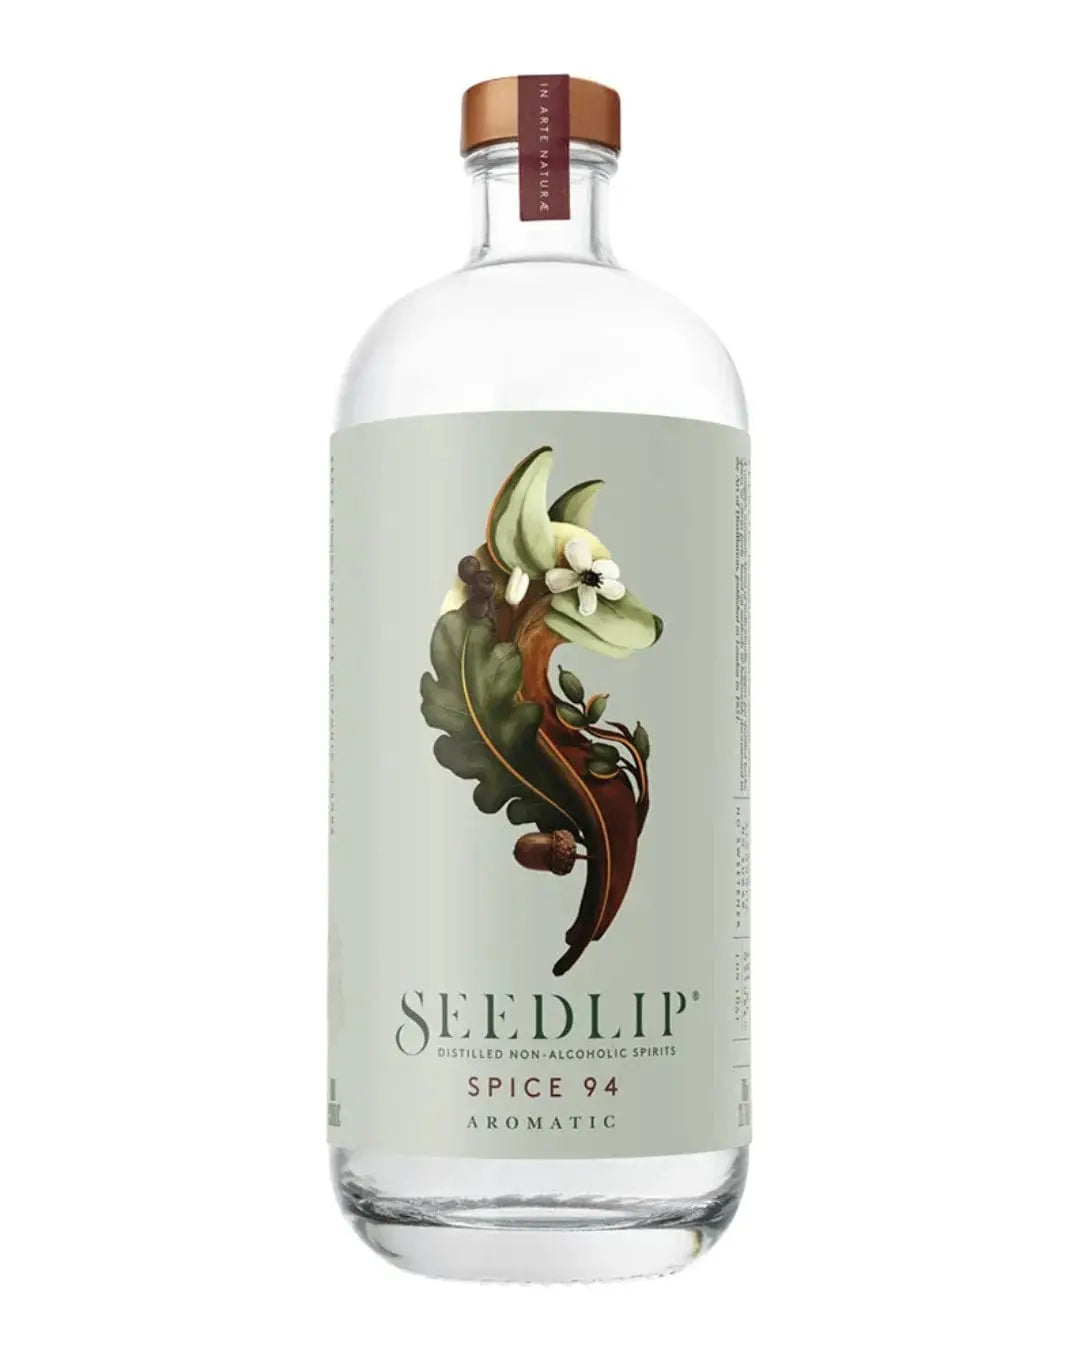 Seedlip Spice 94 Aromatic Non-Alcoholic Spirit, 70 cl Liqueurs & Other Spirits